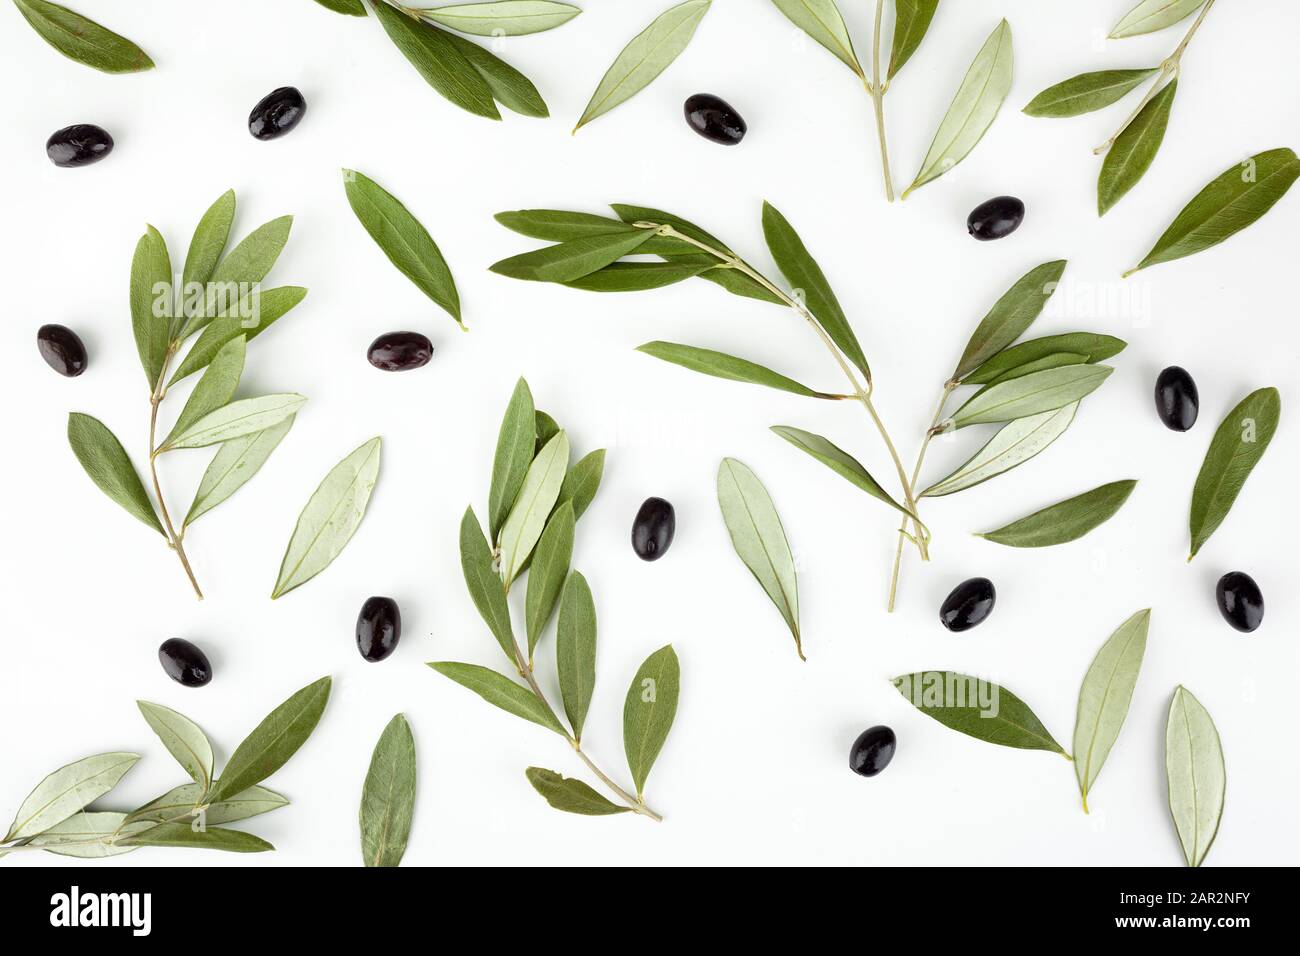 Top view of fresh black olive fruit with leaves on white background. Stock Photo